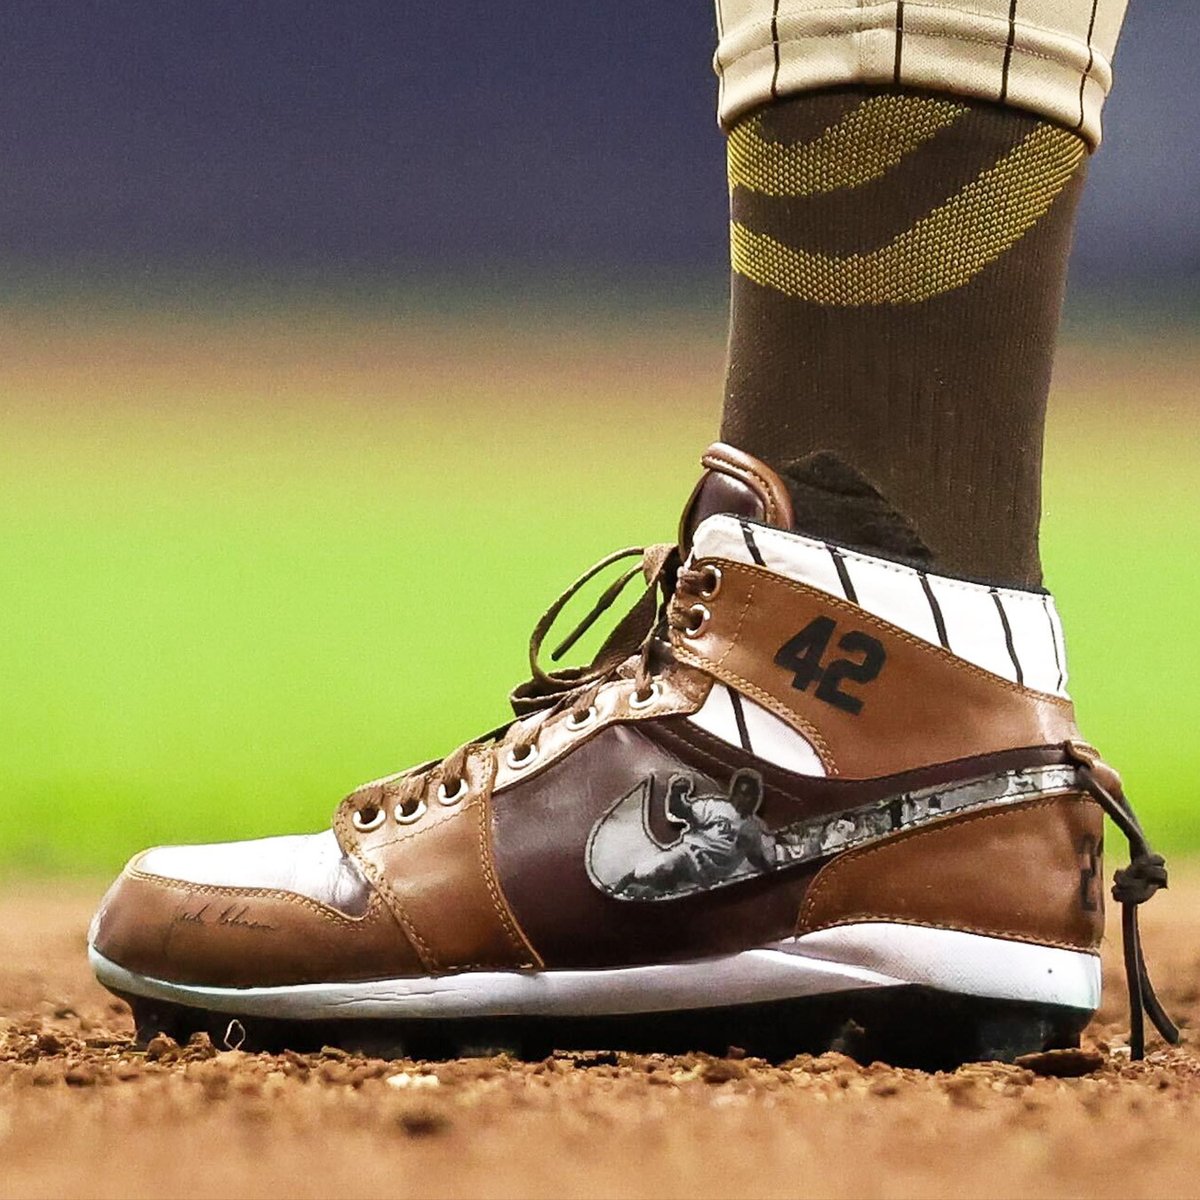 Fernando Tatis Jr.'s Jackie Robinson Jordans are next level 🤯 They feature a design of Jackie sliding in the Nike swoosh #Jackie42